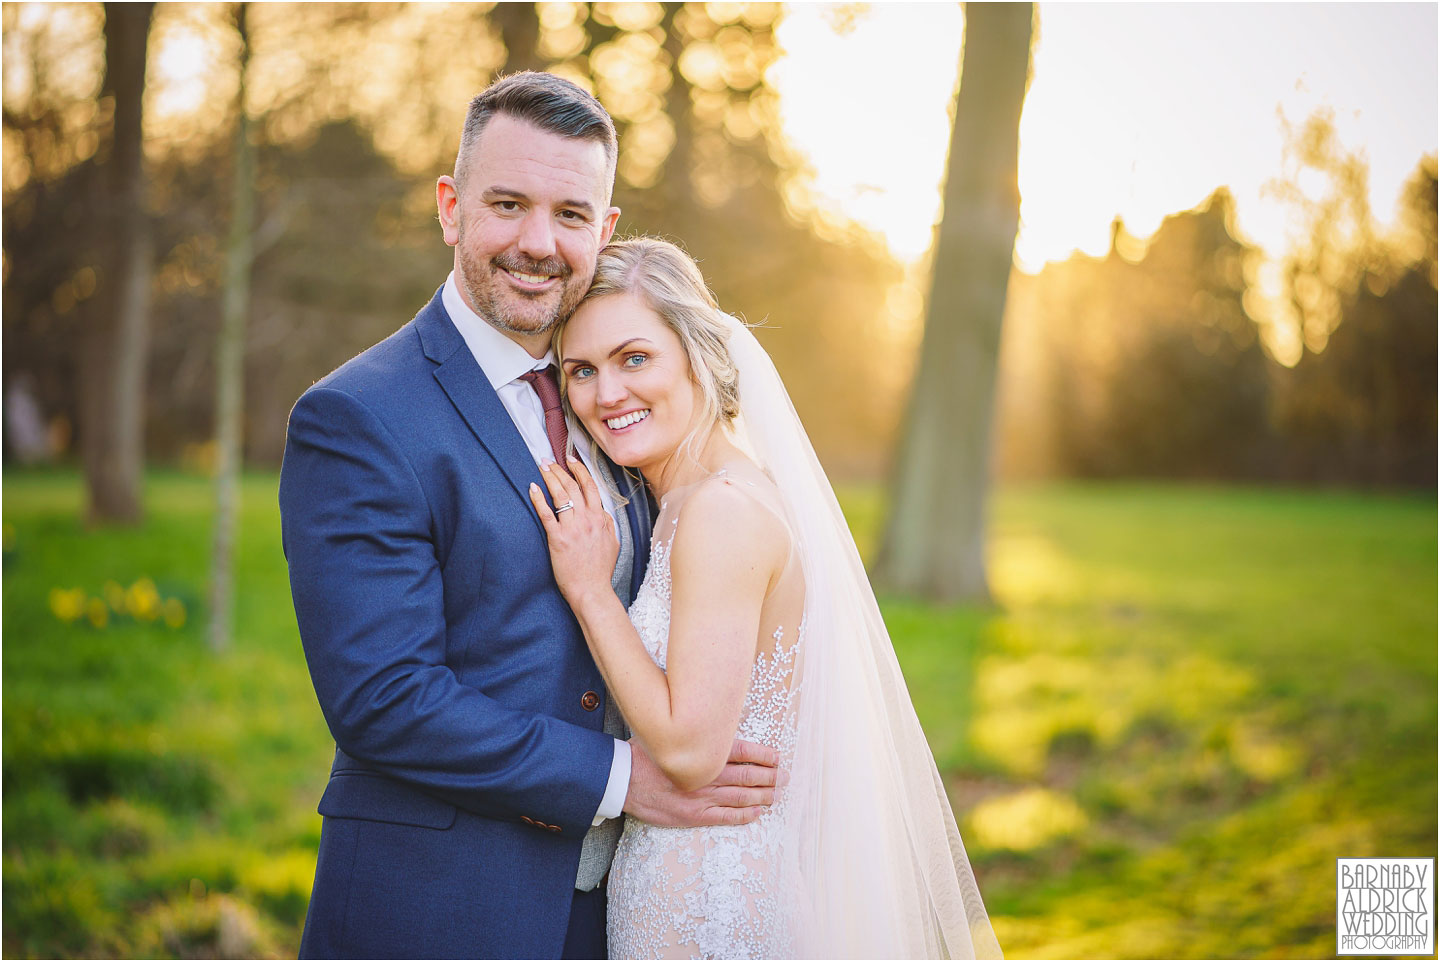 Golden Hour Wedding coupe photos at Meols Hall near Southport